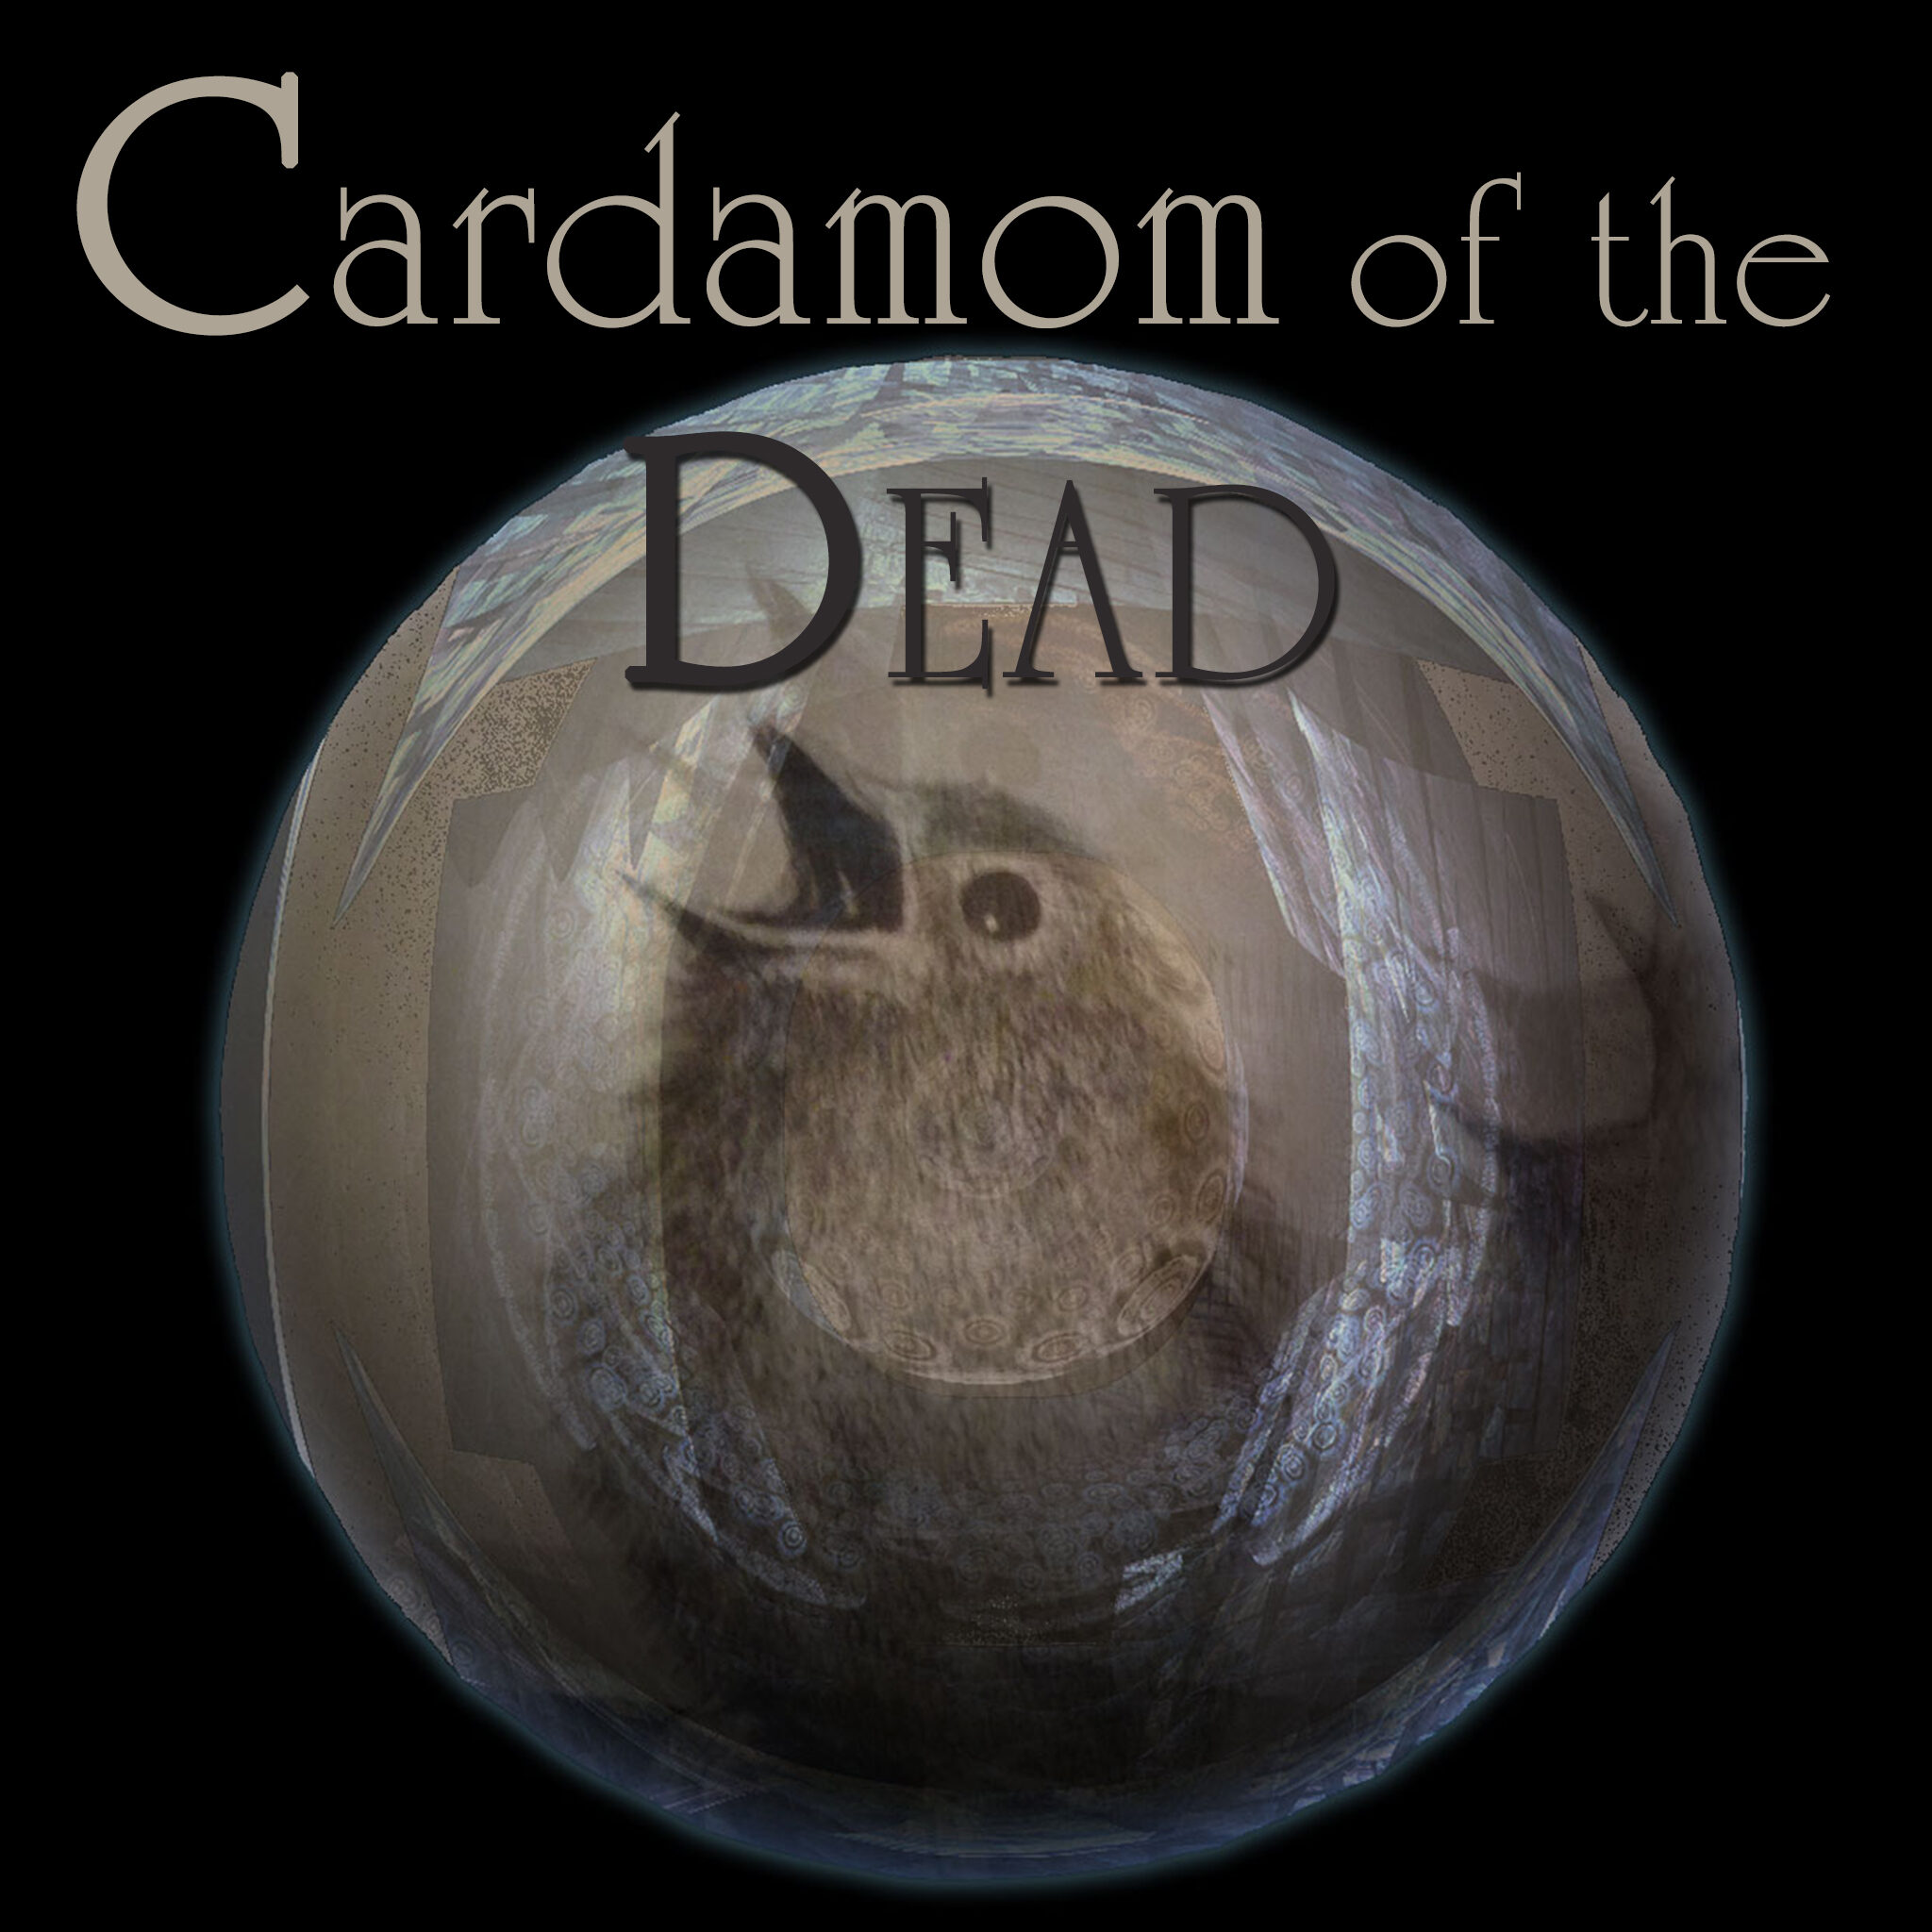 Everyone at this party is Dead/Cardamom of the Dead is one of the first lyric literary works for Oculus Rift. It is a complete but expanding work (Cardamom of the Dead is the larger suite of stories) containing about 30 small narrative worlds, explored in a sandbox.